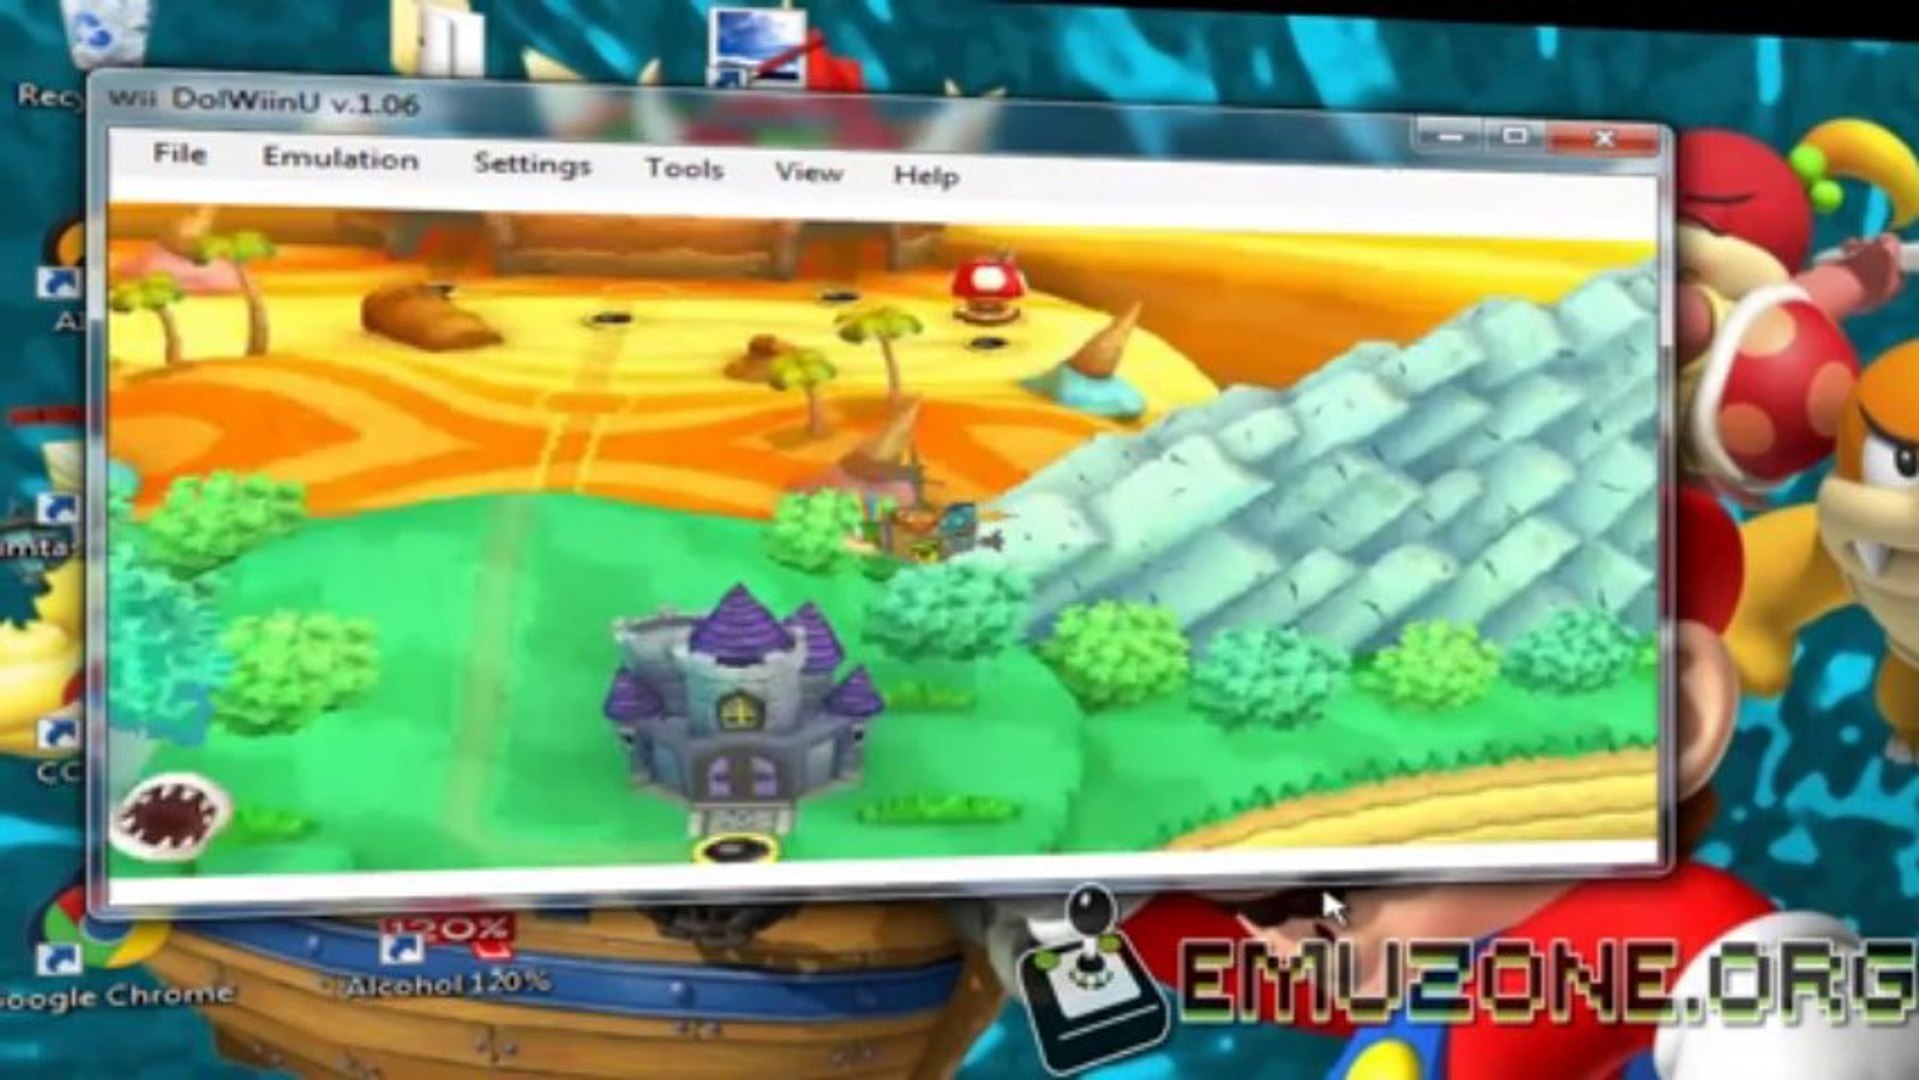 Wii U Emulator For Pc Windows 7 8 Linux Mac Os X Download From Emuzone Org Video Dailymotion